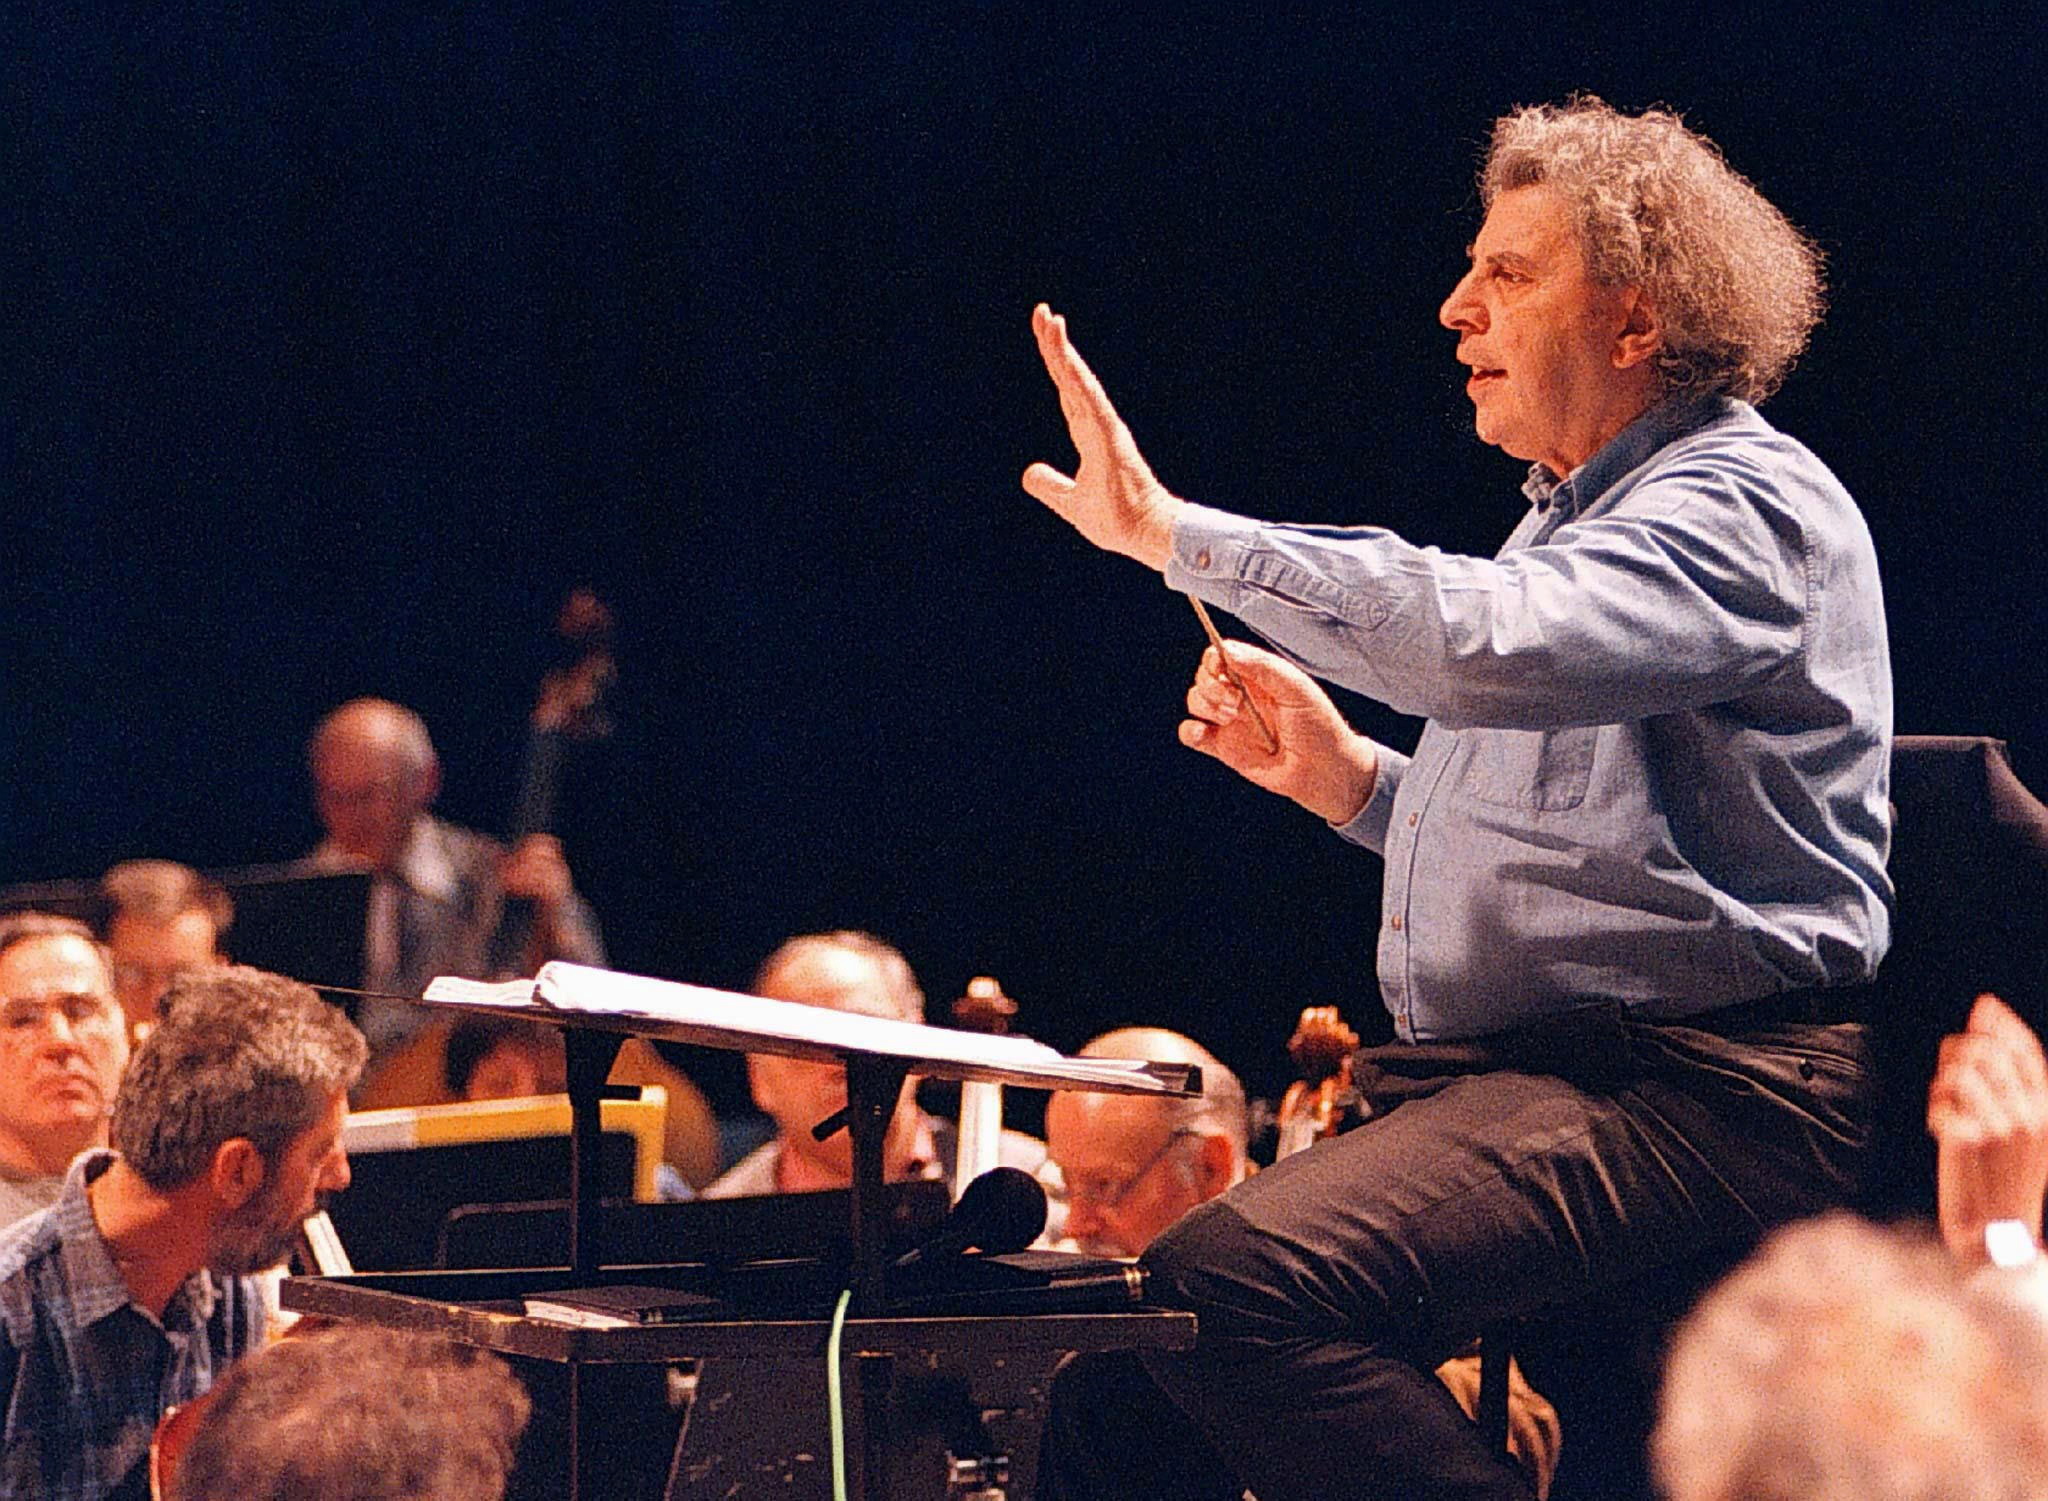 Greek composer Mikis Theodorakis conducts the Skopje's opera orchestra during a rehearsal in the Macedonian capital